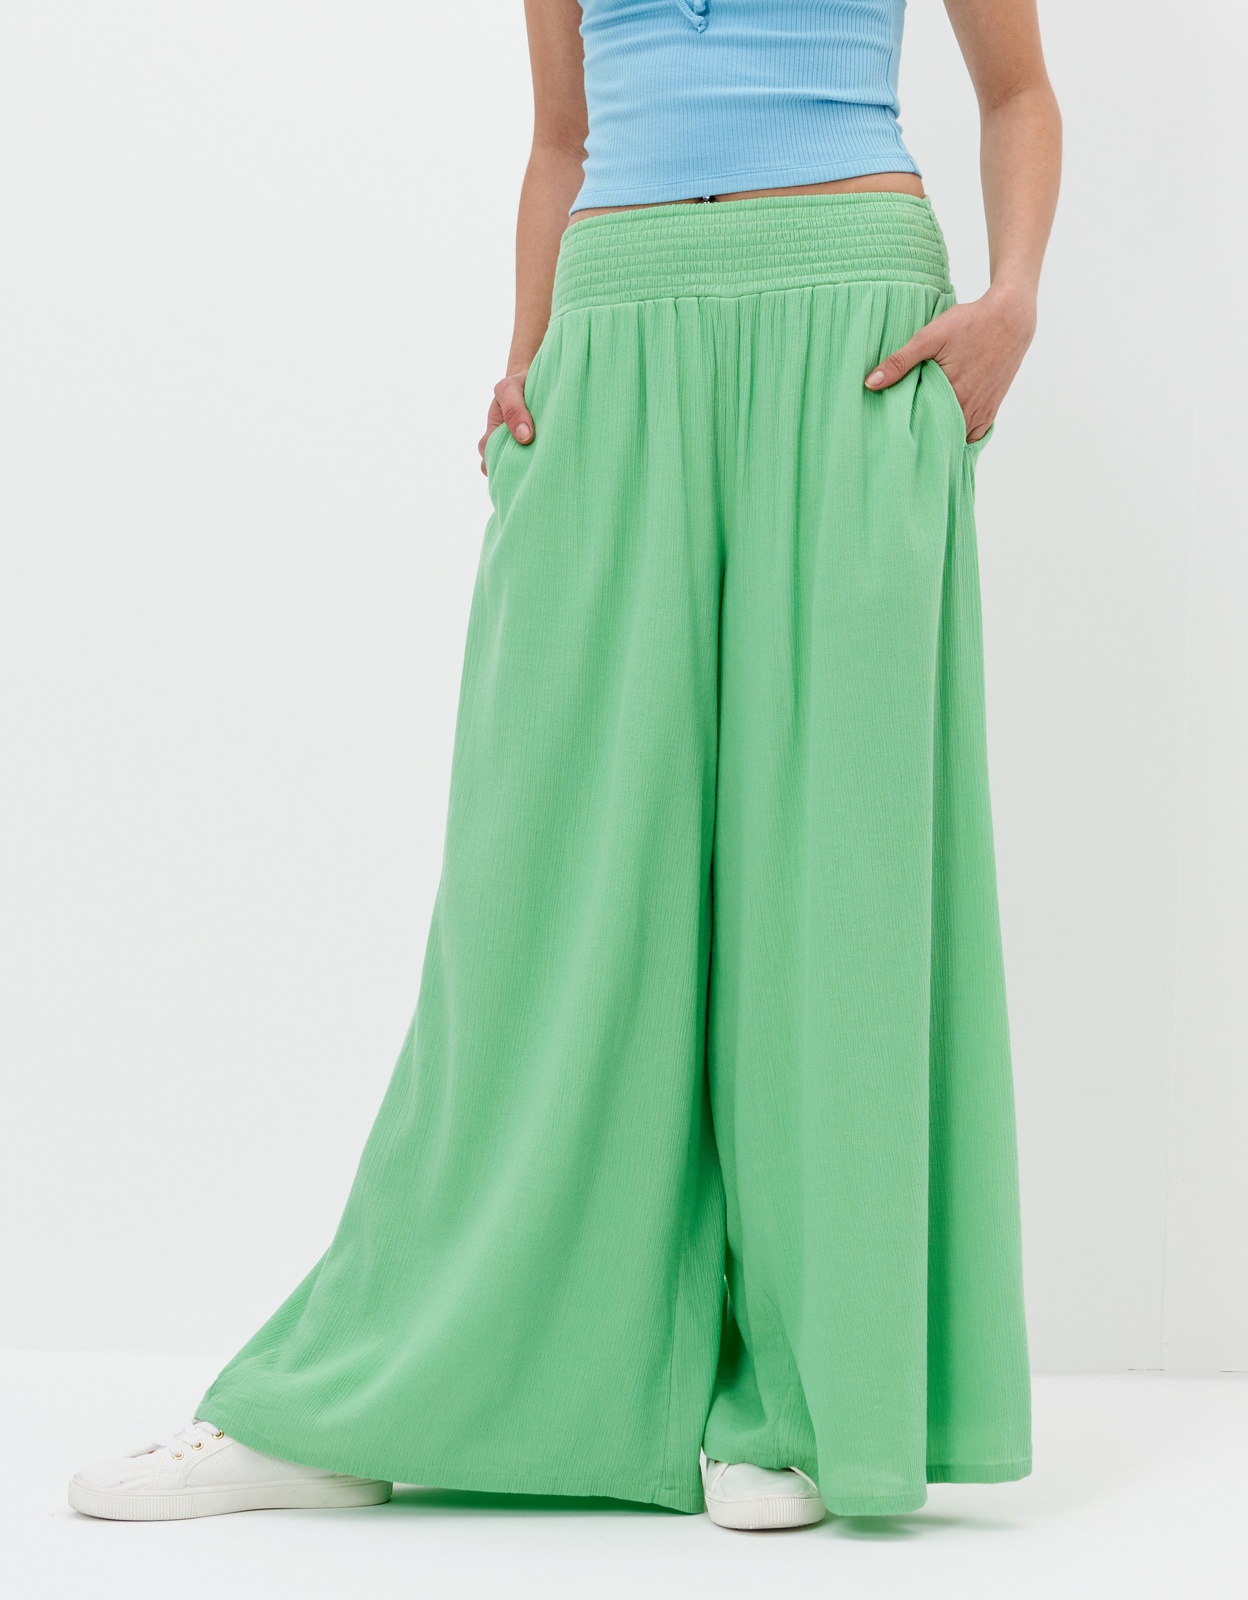 Shop AE Super High-Waisted Smocked Wide-Leg Pant online